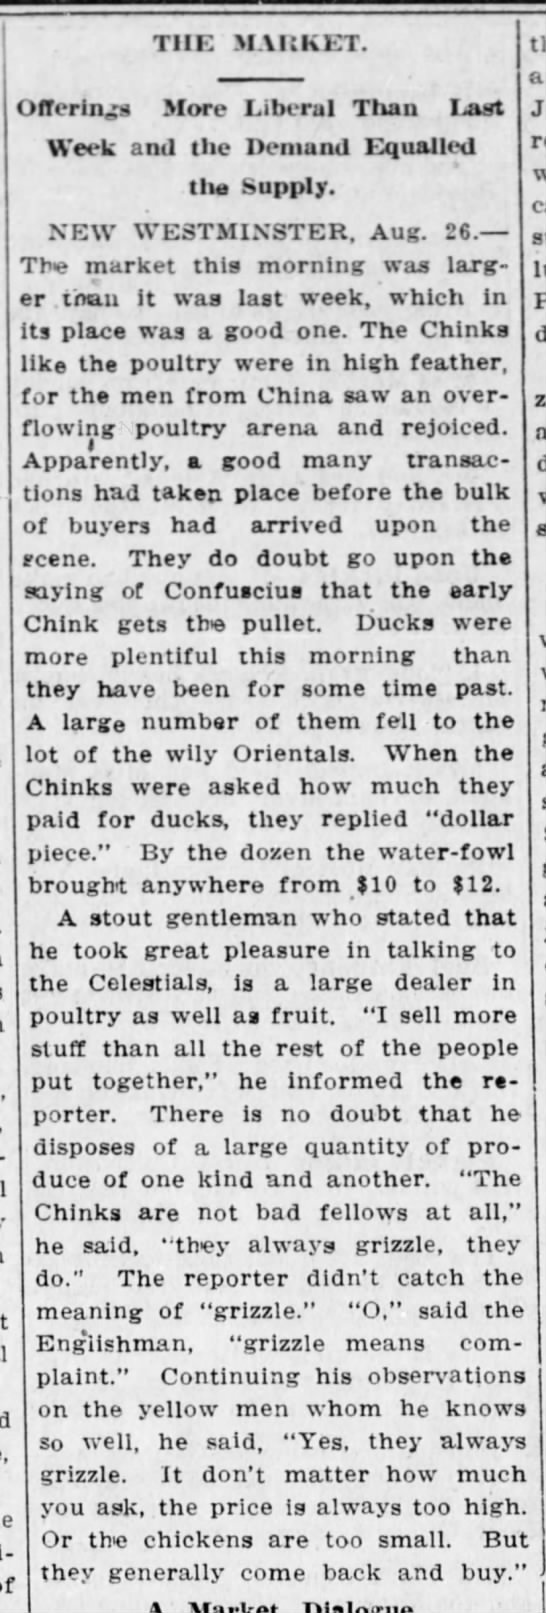 Chilliwack Progress newspaper clipping from August 31, 1910